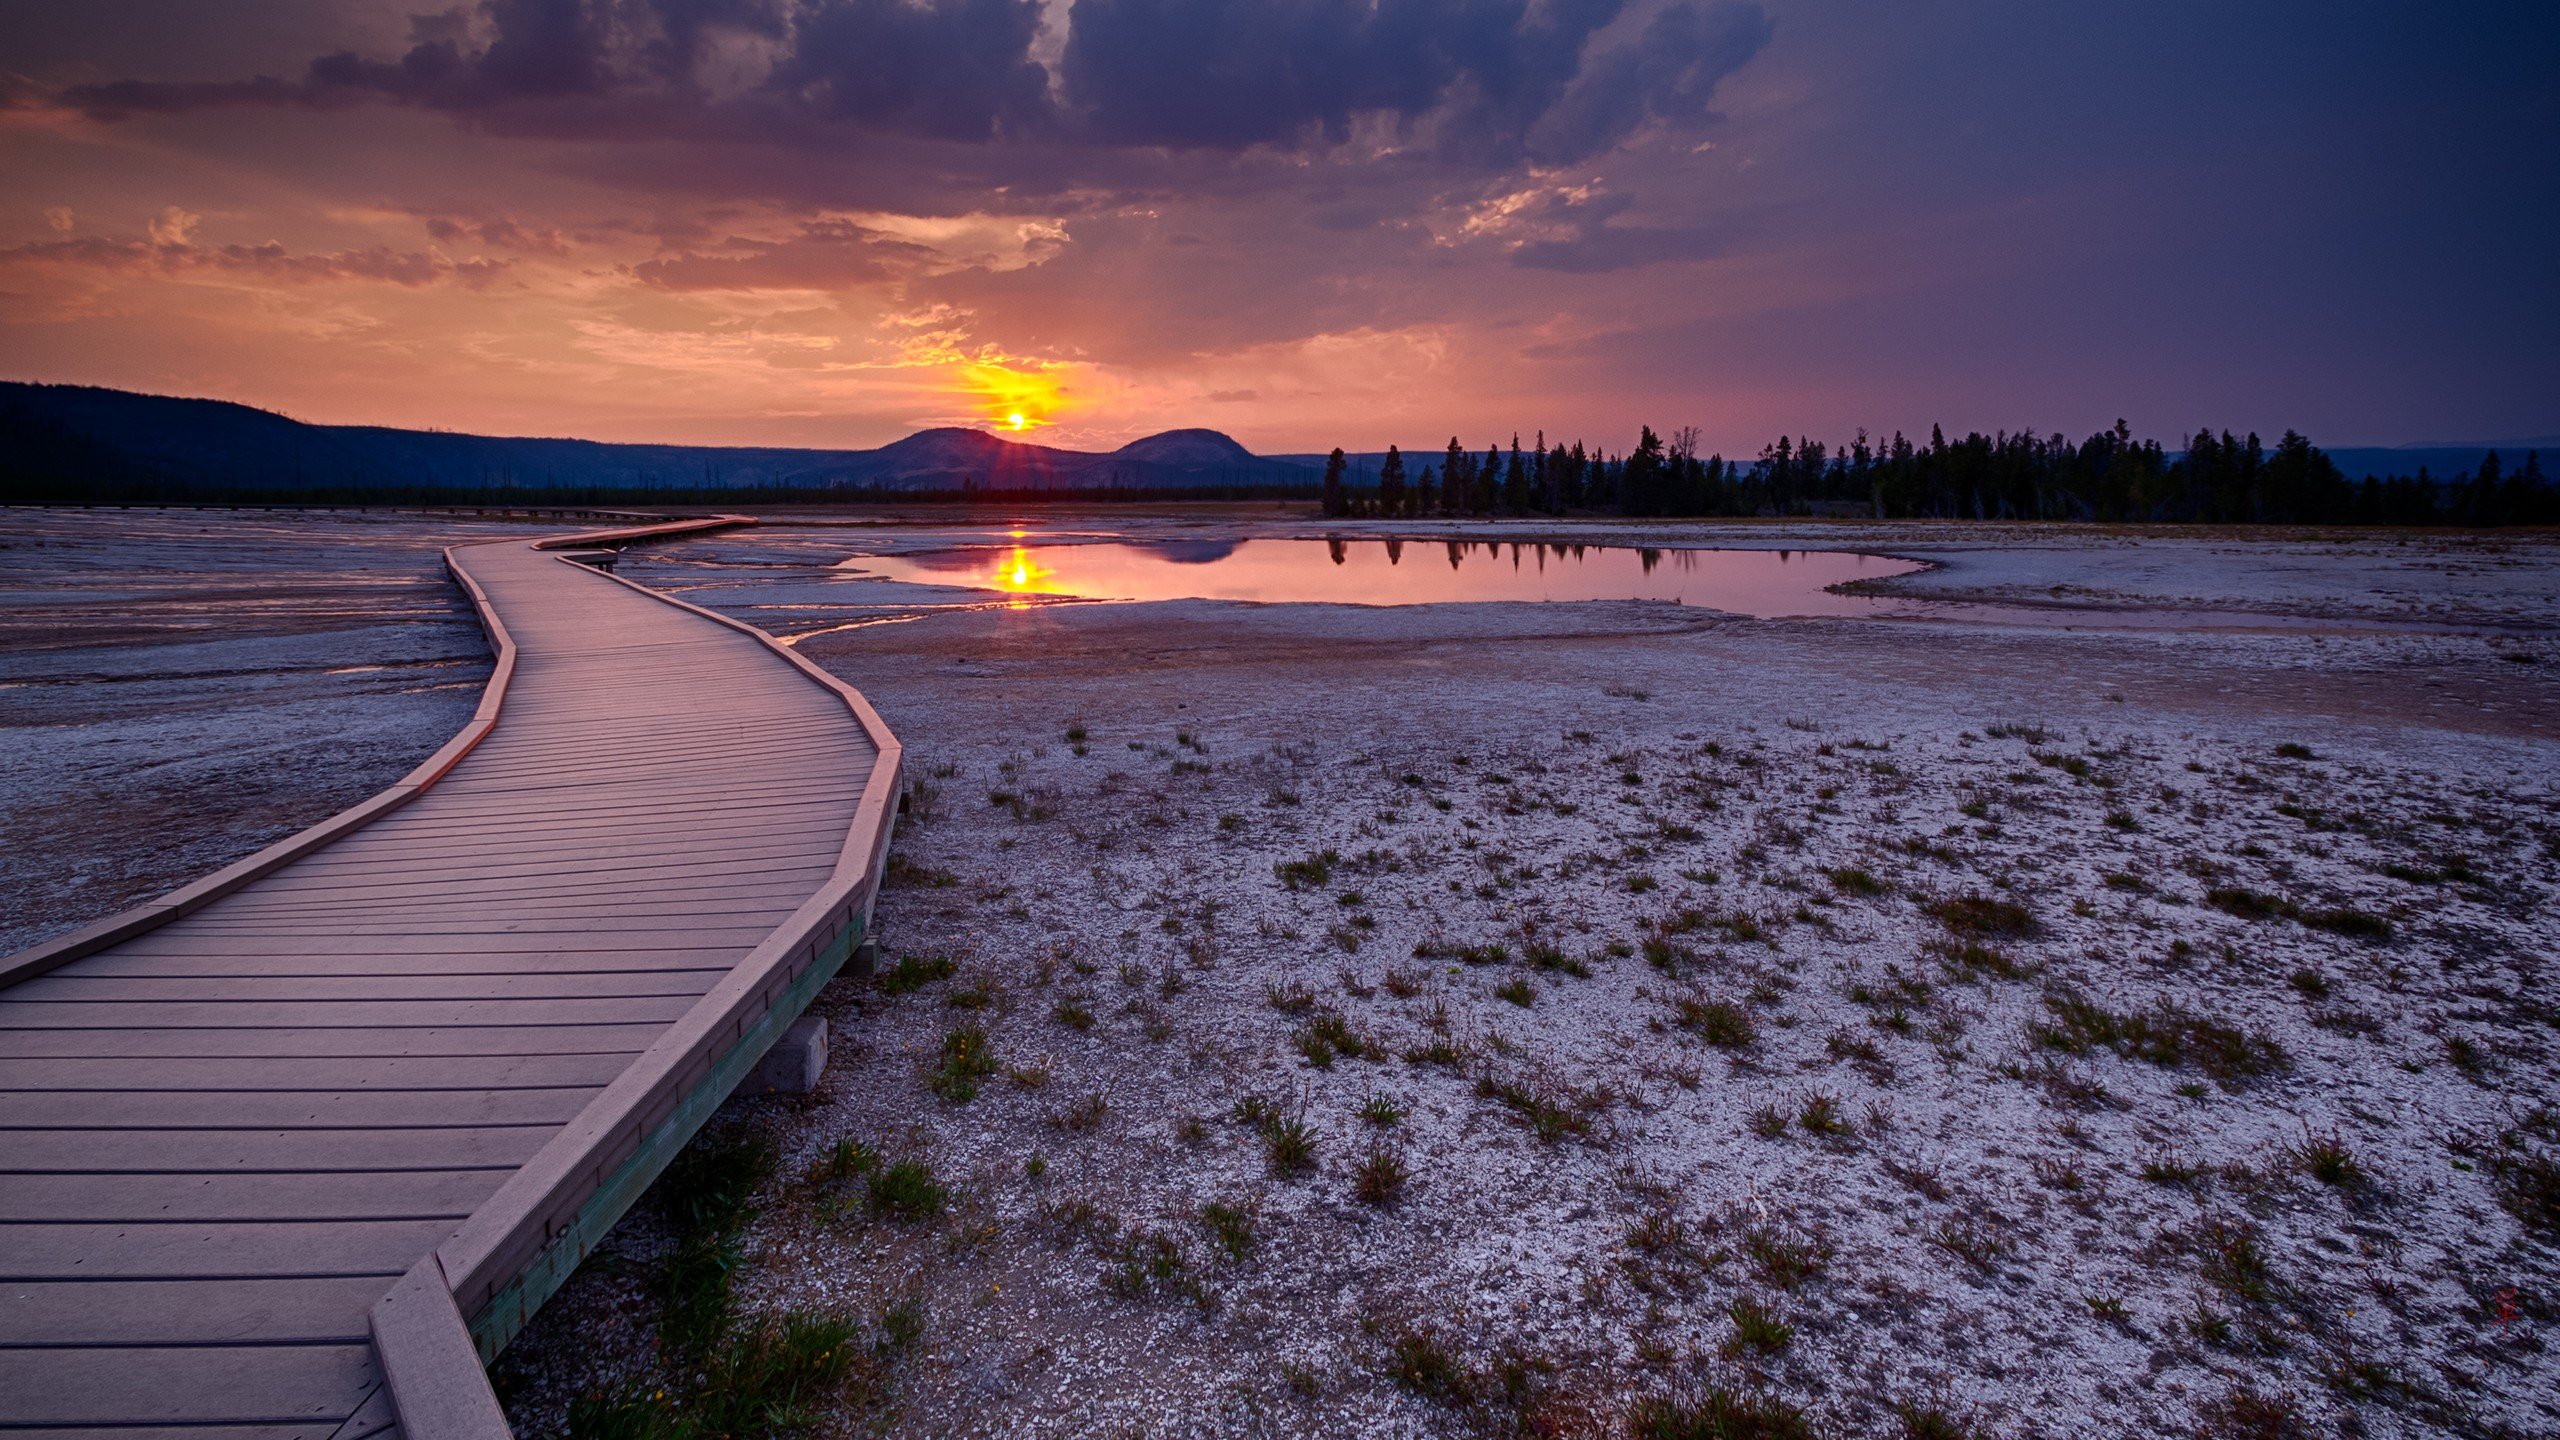 sunset, Landscapes, Nature, Yellowstone, Pictorial Wallpaper